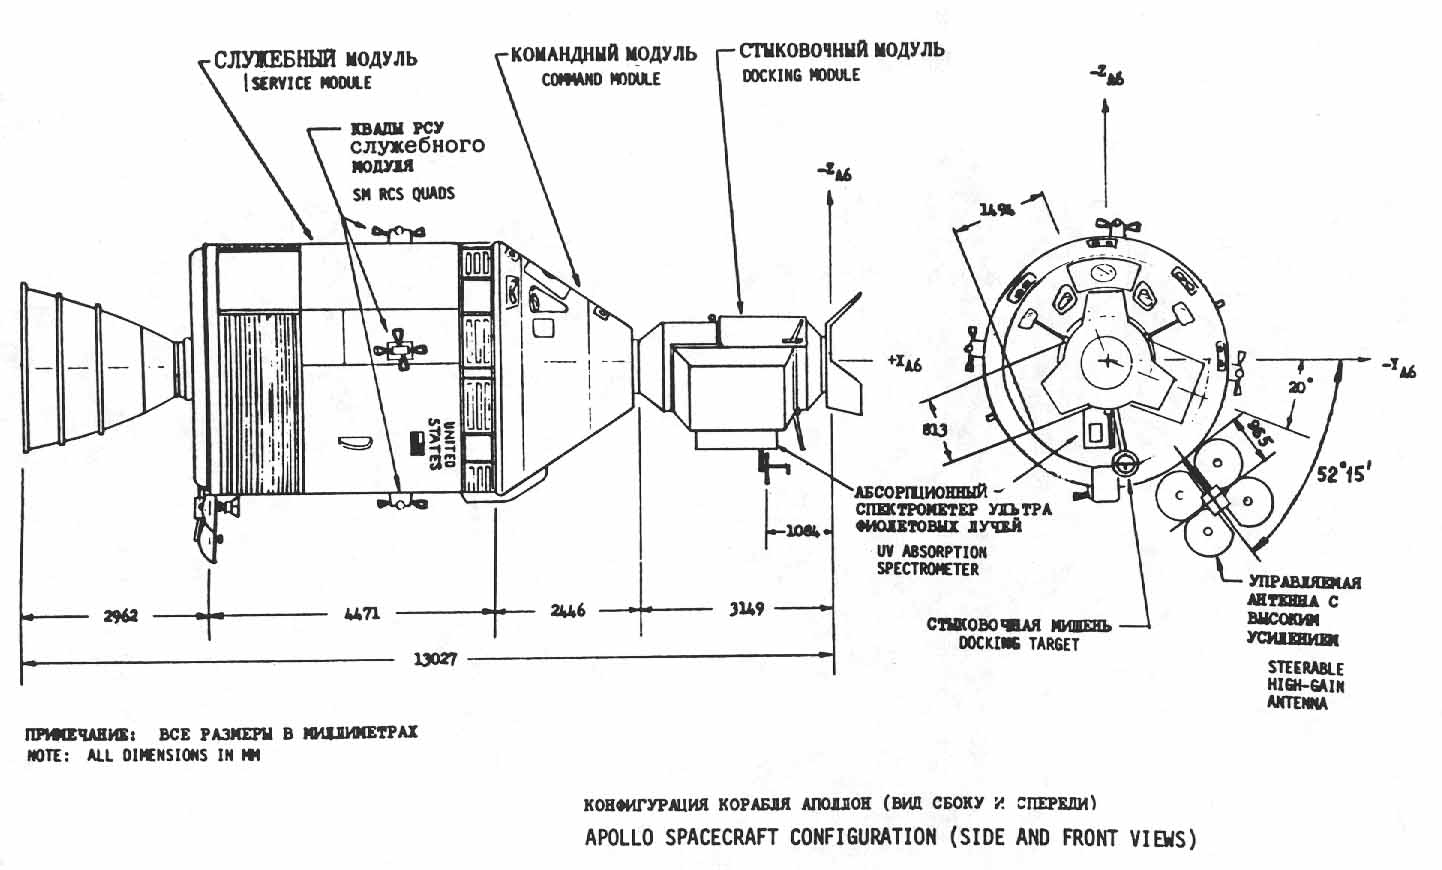 cross-sectional drawing of Apollo spacecraft